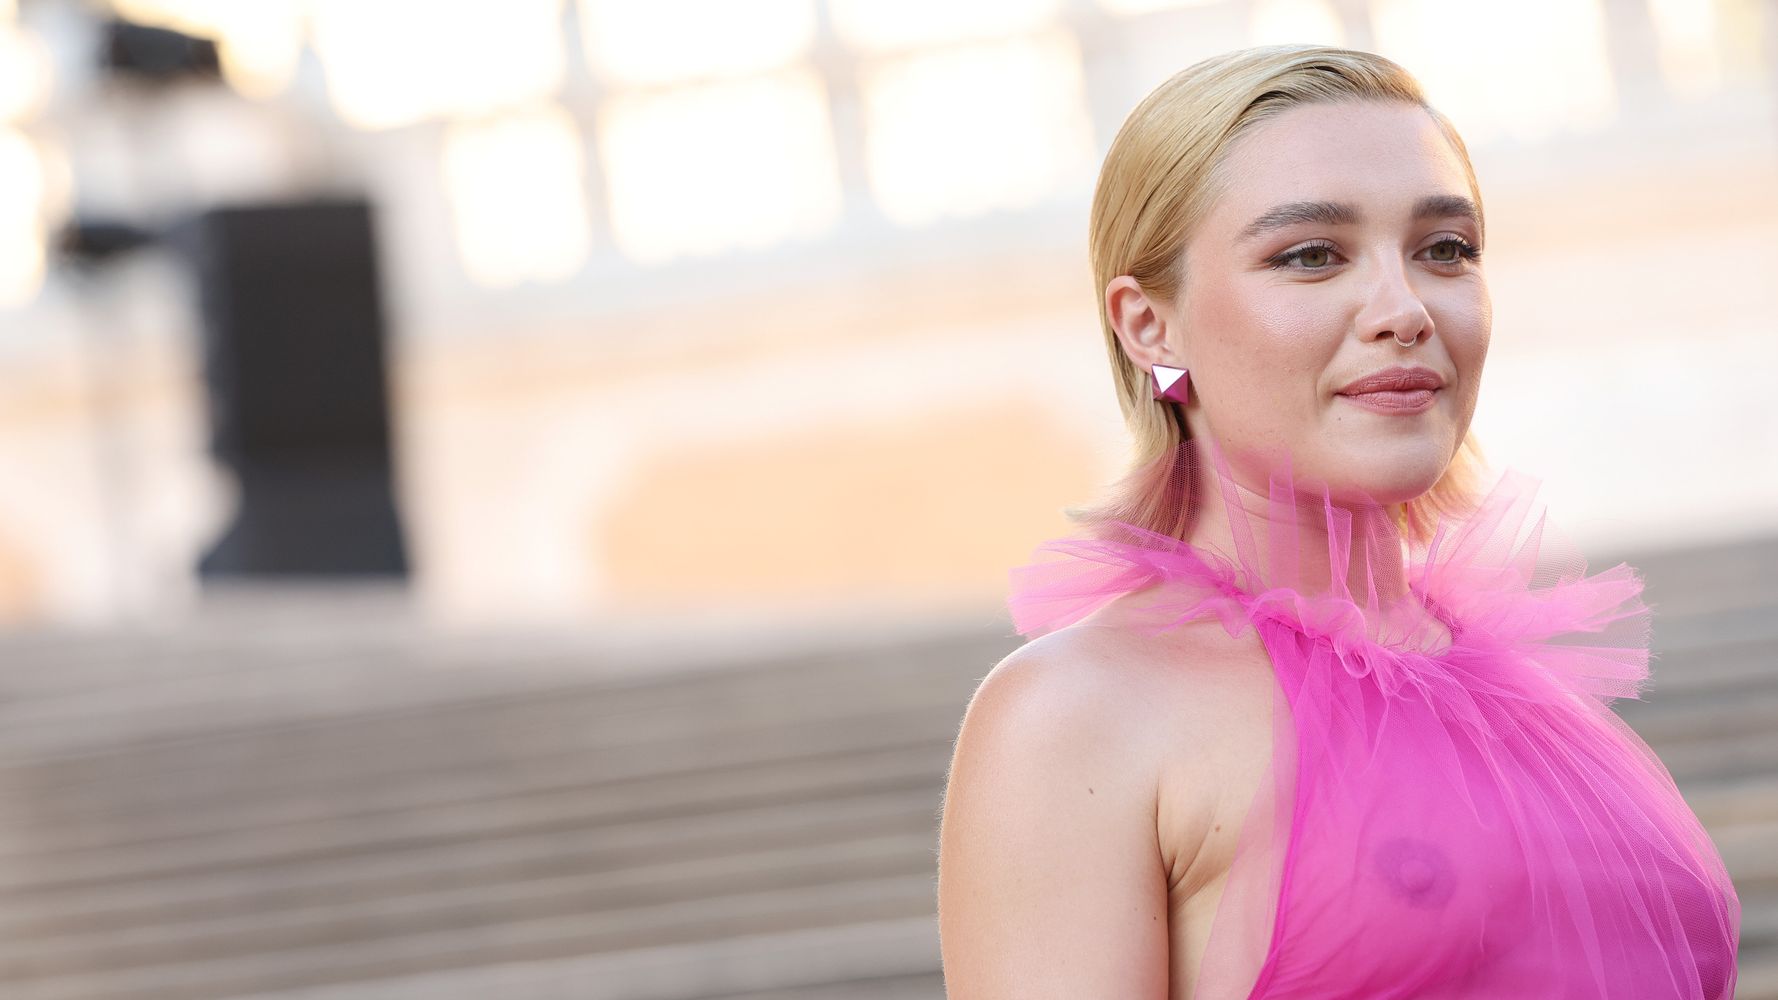 Florence Pugh Wishes To Know: ‘Why Are You So Fearful Of Breasts?’